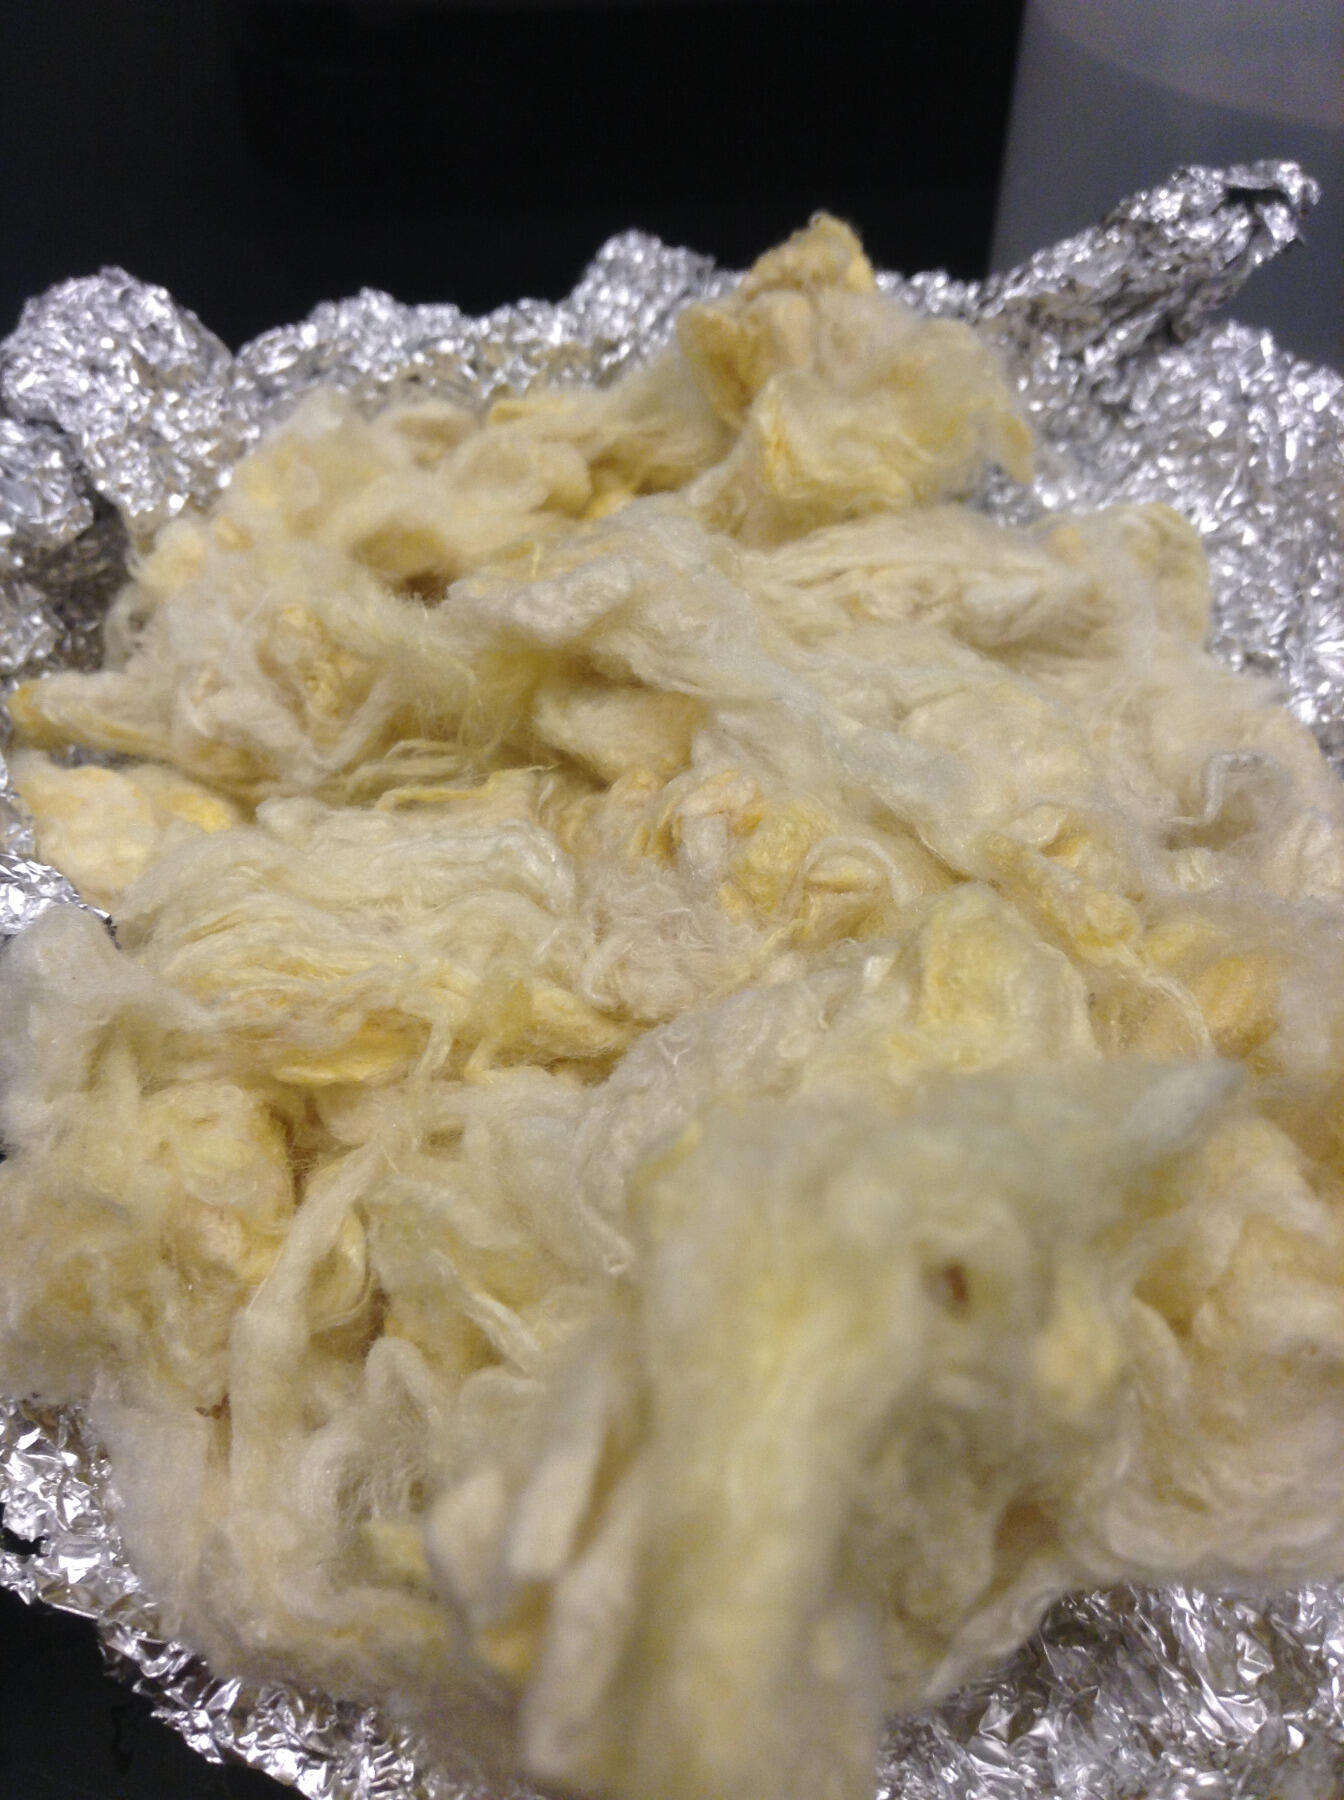 Boiled-down silk, which will be made into substrates on which stem cells can be grown.